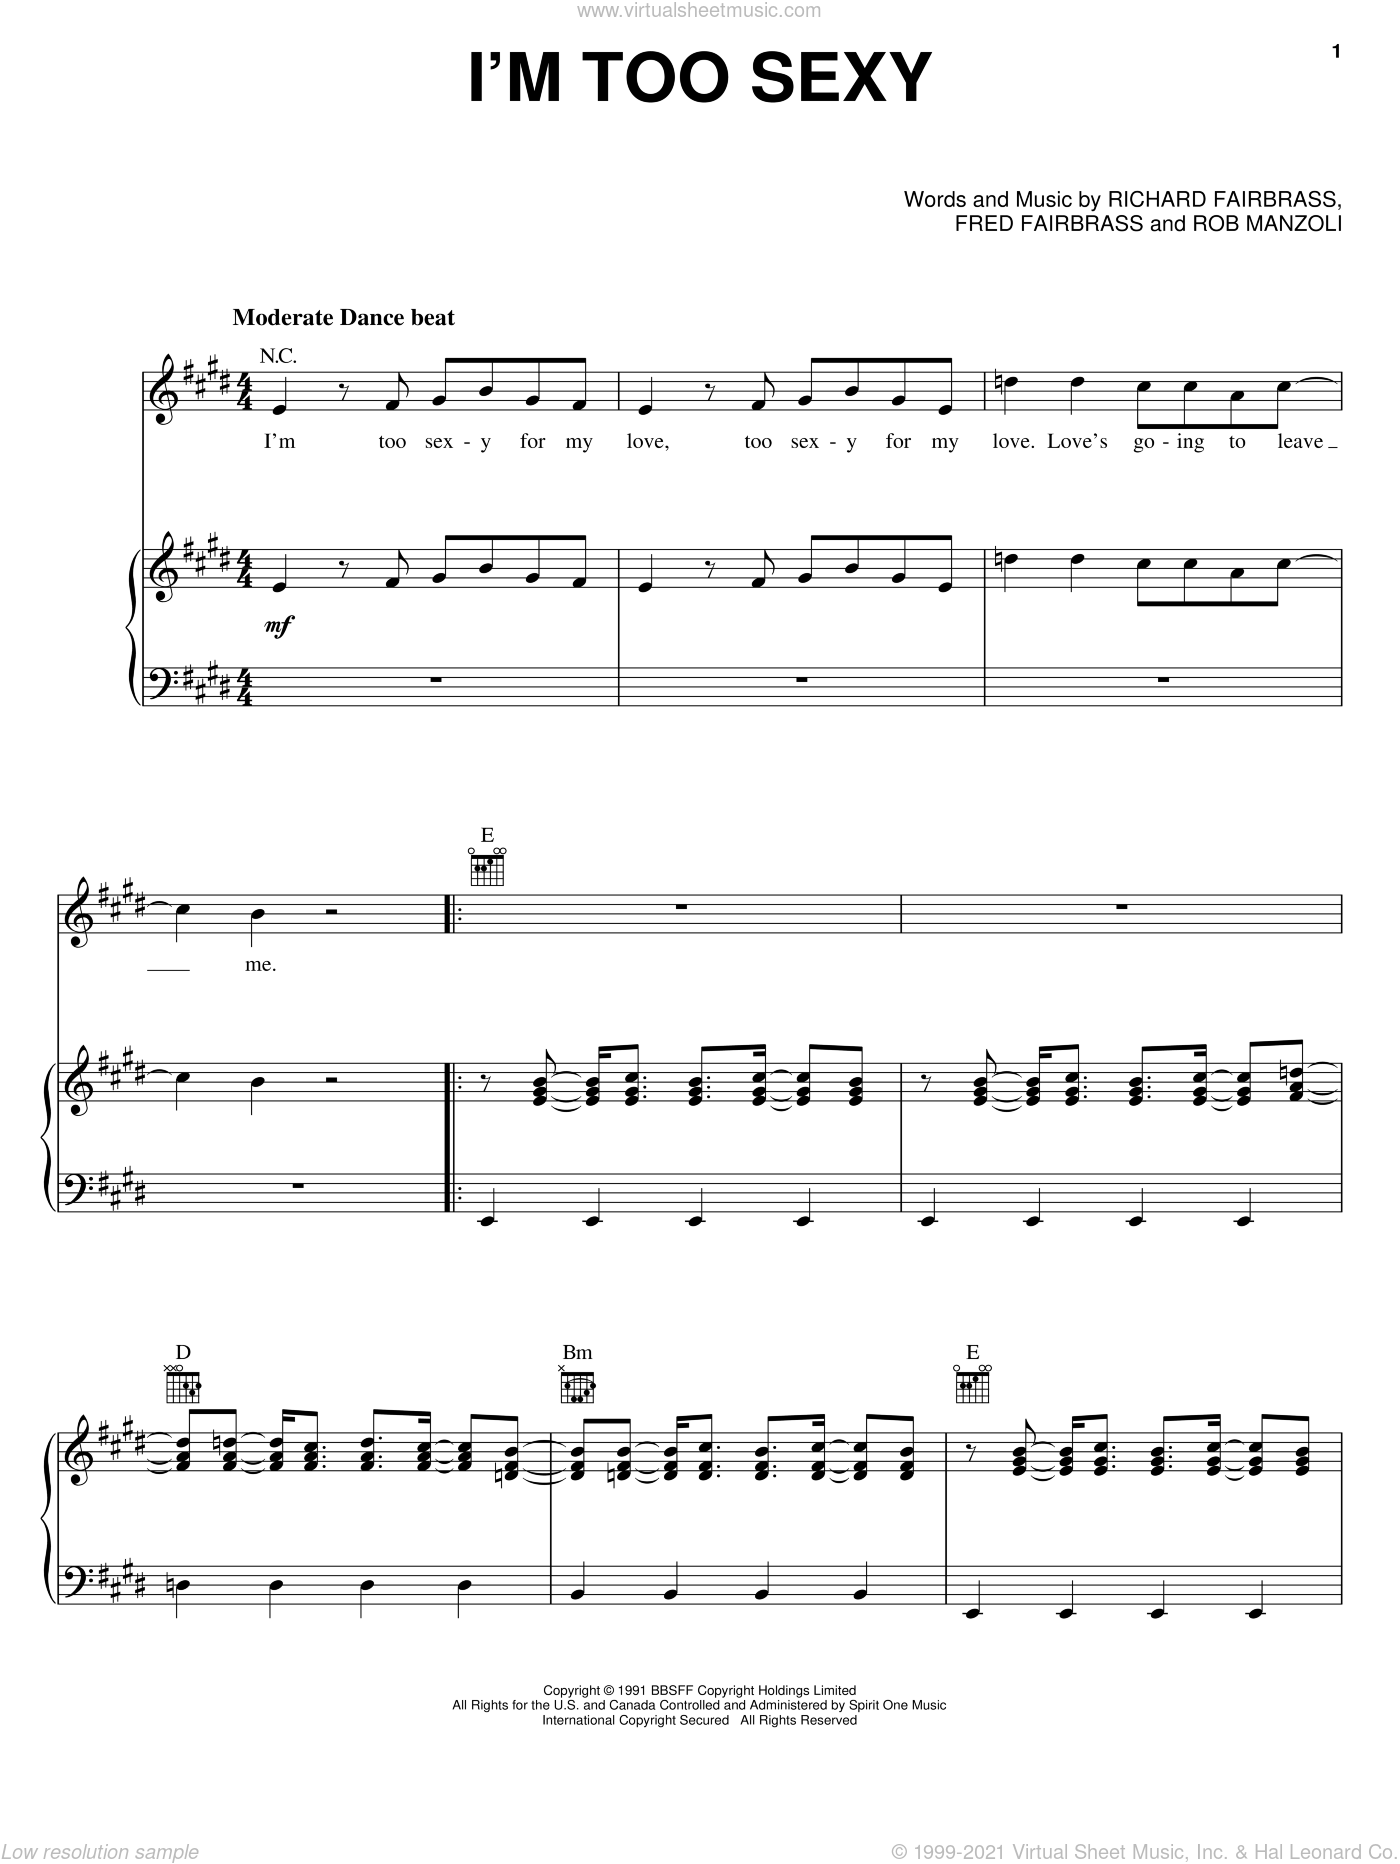 Free sheet music preview of I'm Too Sexy for voice, piano or guitar by...